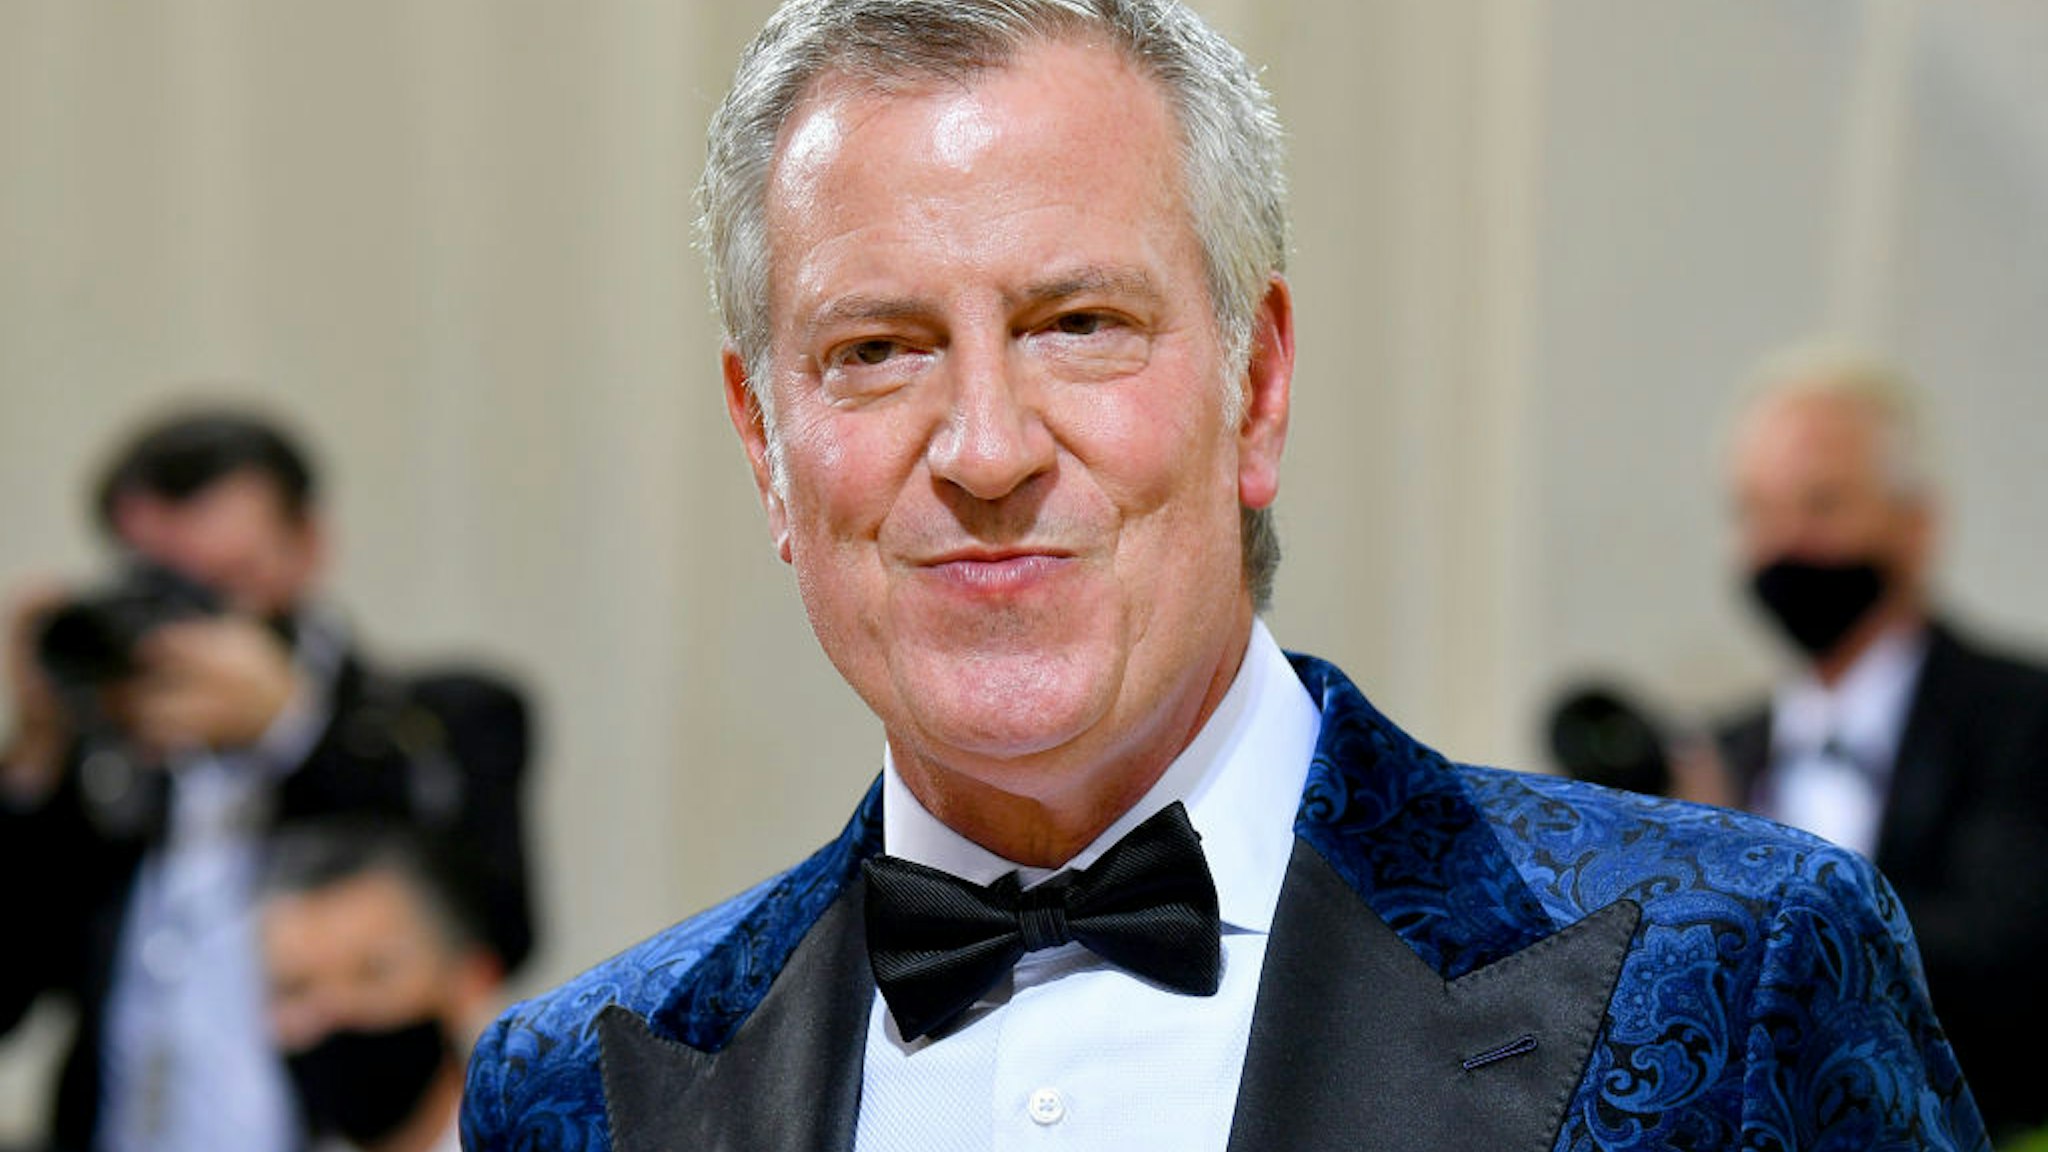 New York City mayor Bill de Blasio attends The 2021 Met Gala Celebrating In America: A Lexicon Of Fashion at Metropolitan Museum of Art on September 13, 2021 in New York City.